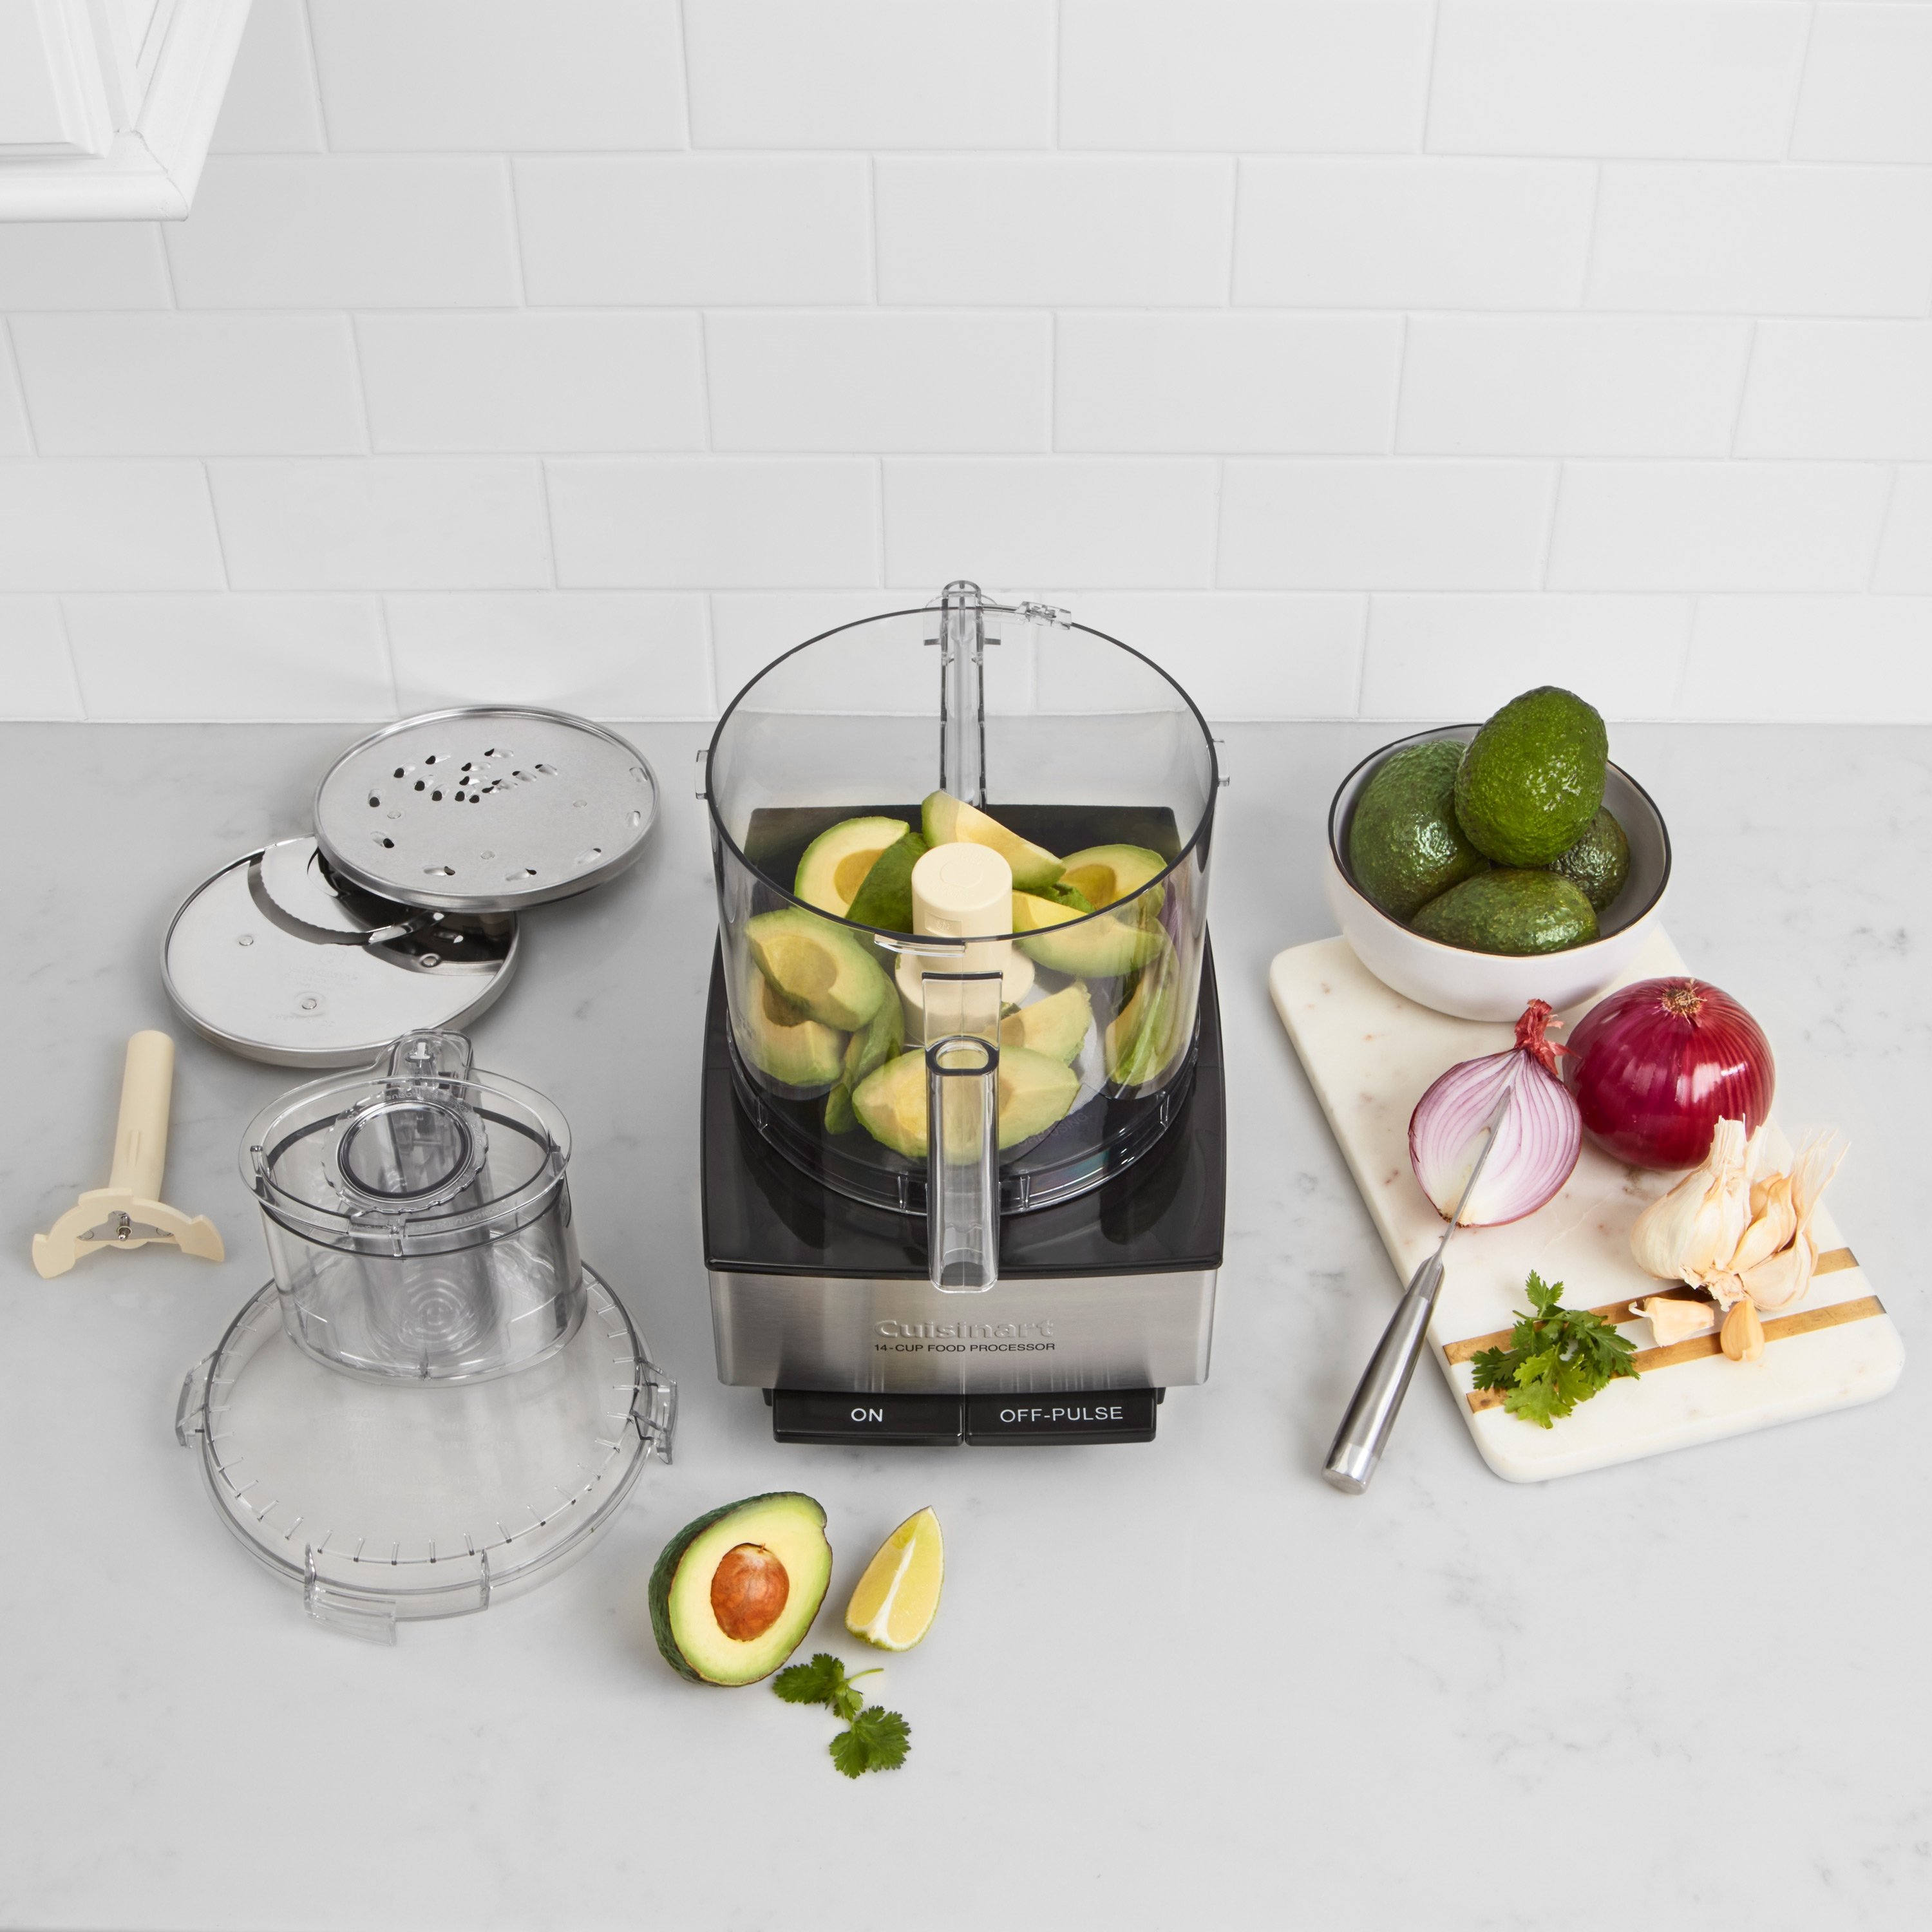 https://www.cuisinart.com/globalassets/cuisinart-image-feed/dfp-14bcny/dfp14bcny_lifestyle_overhead_cropped.jpg